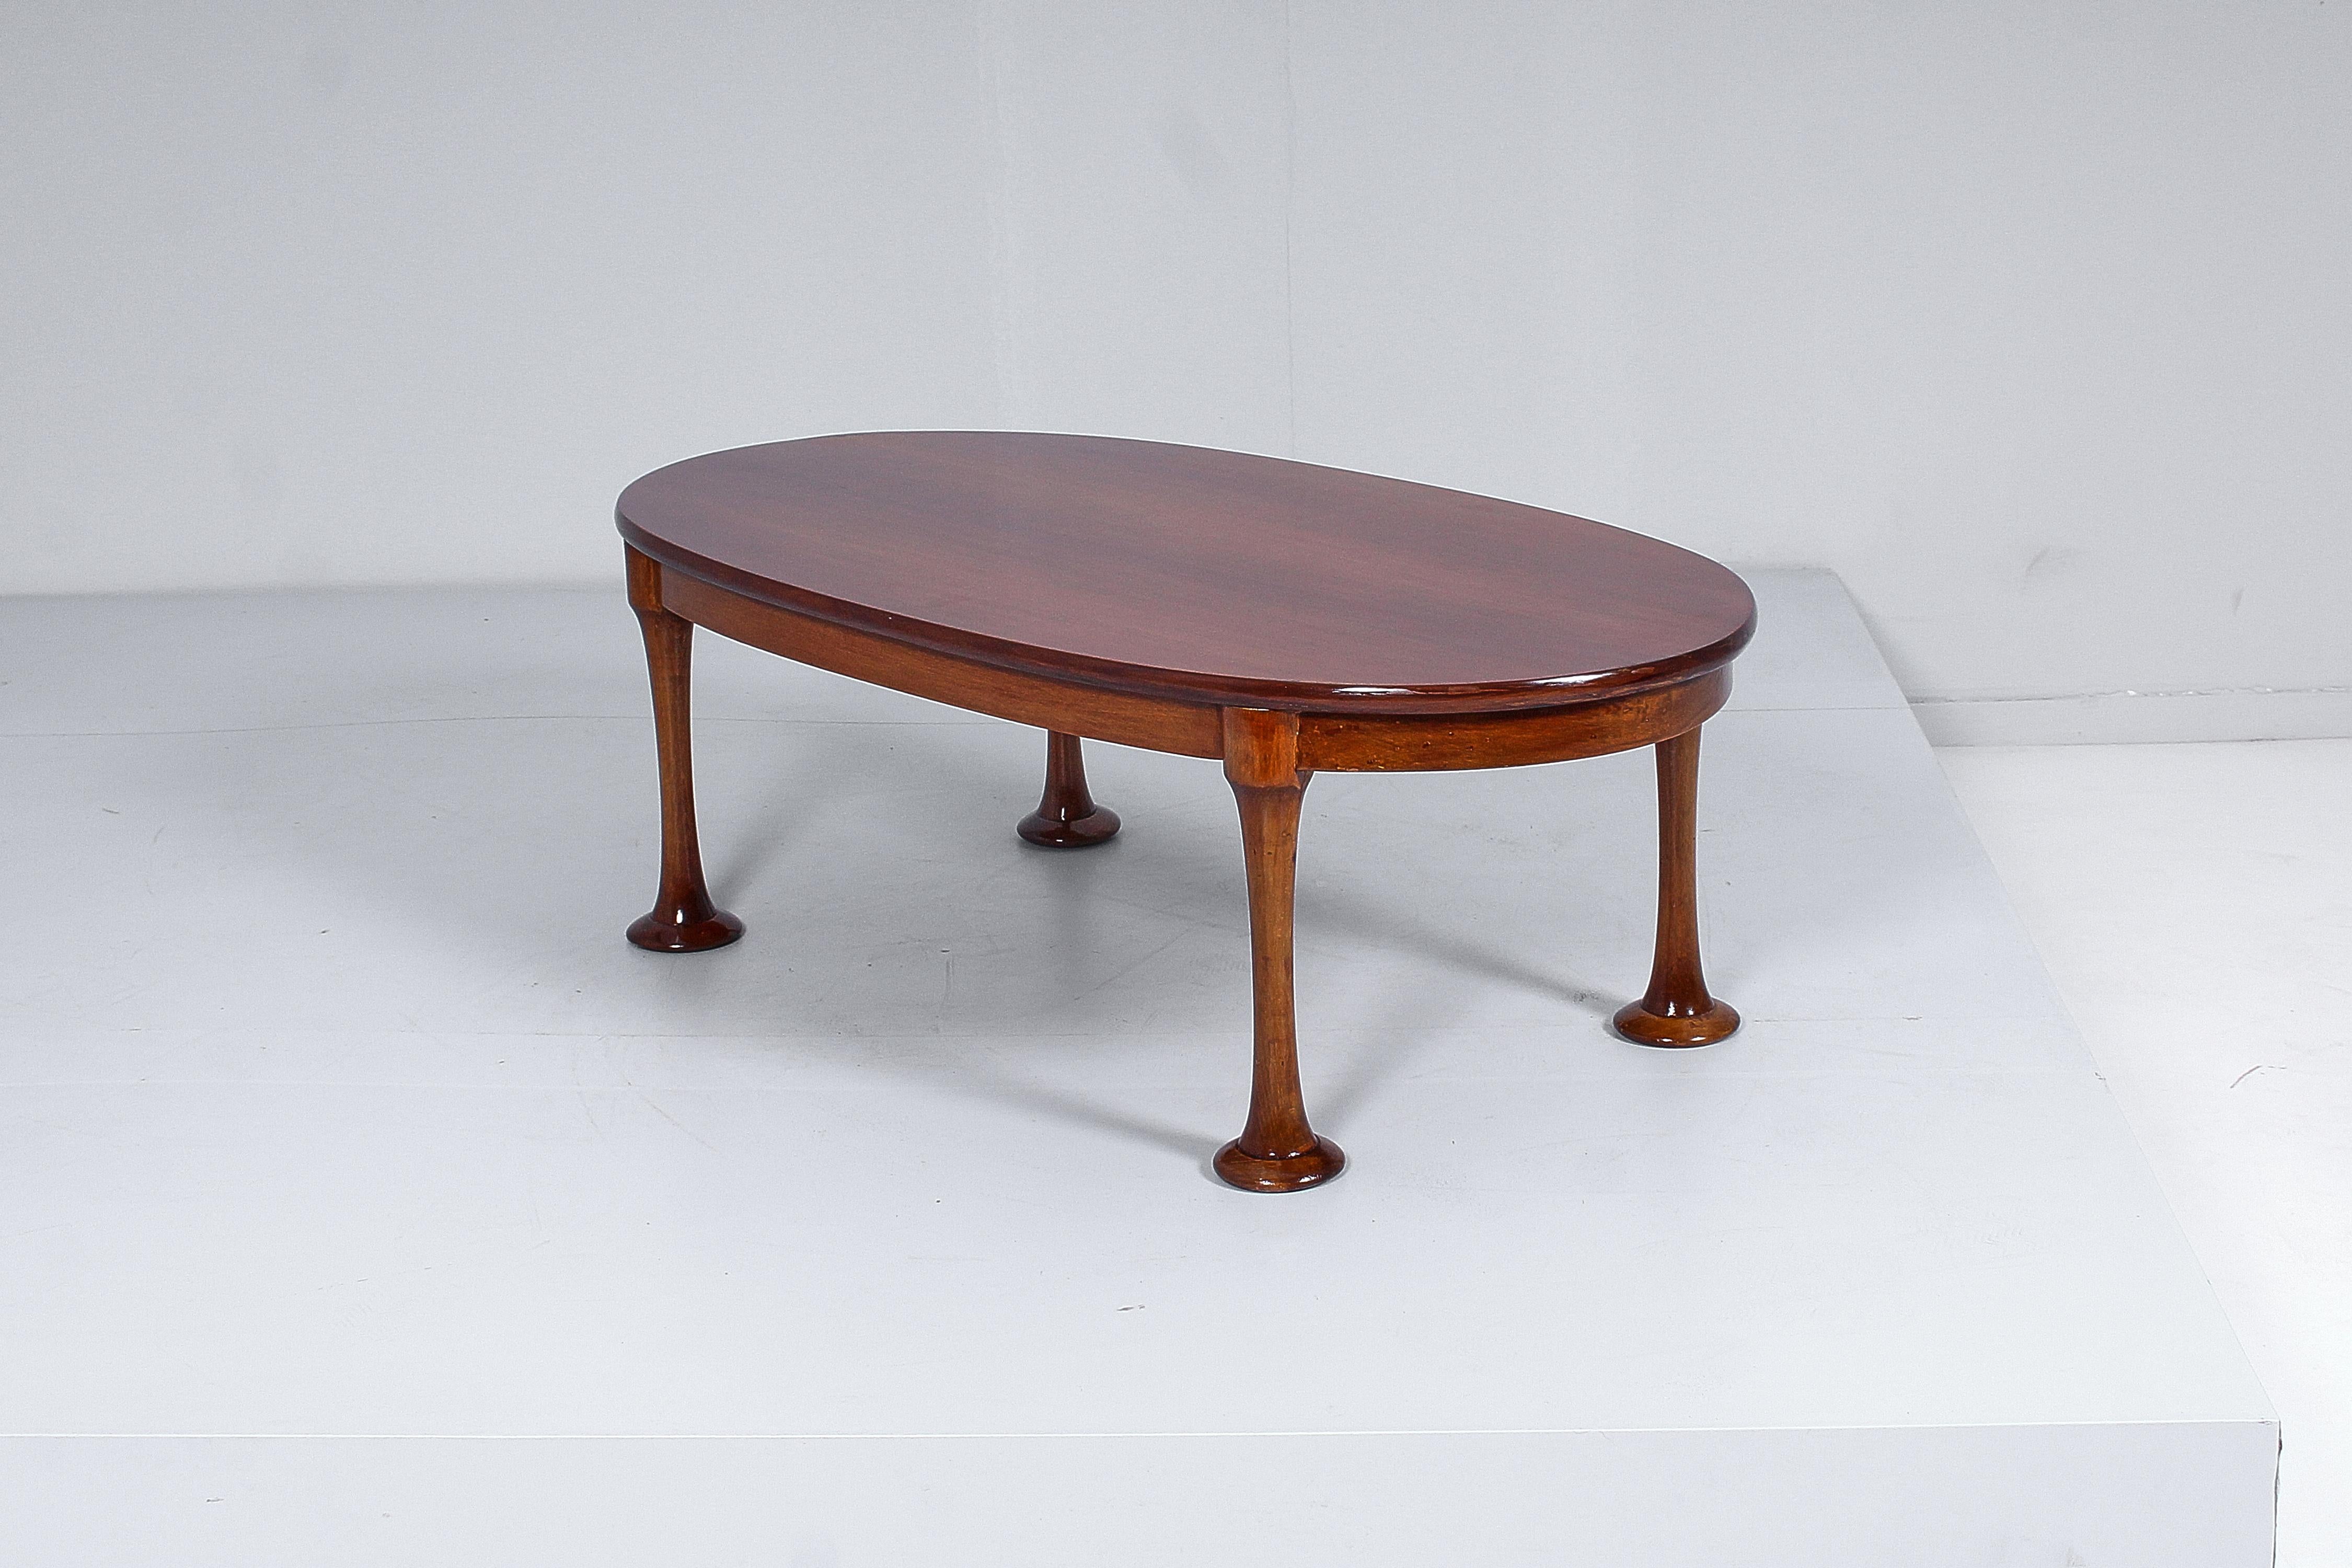 Midcentury A. Mangiarotti Style Wood Coffee Table, 60s, Italy For Sale 3